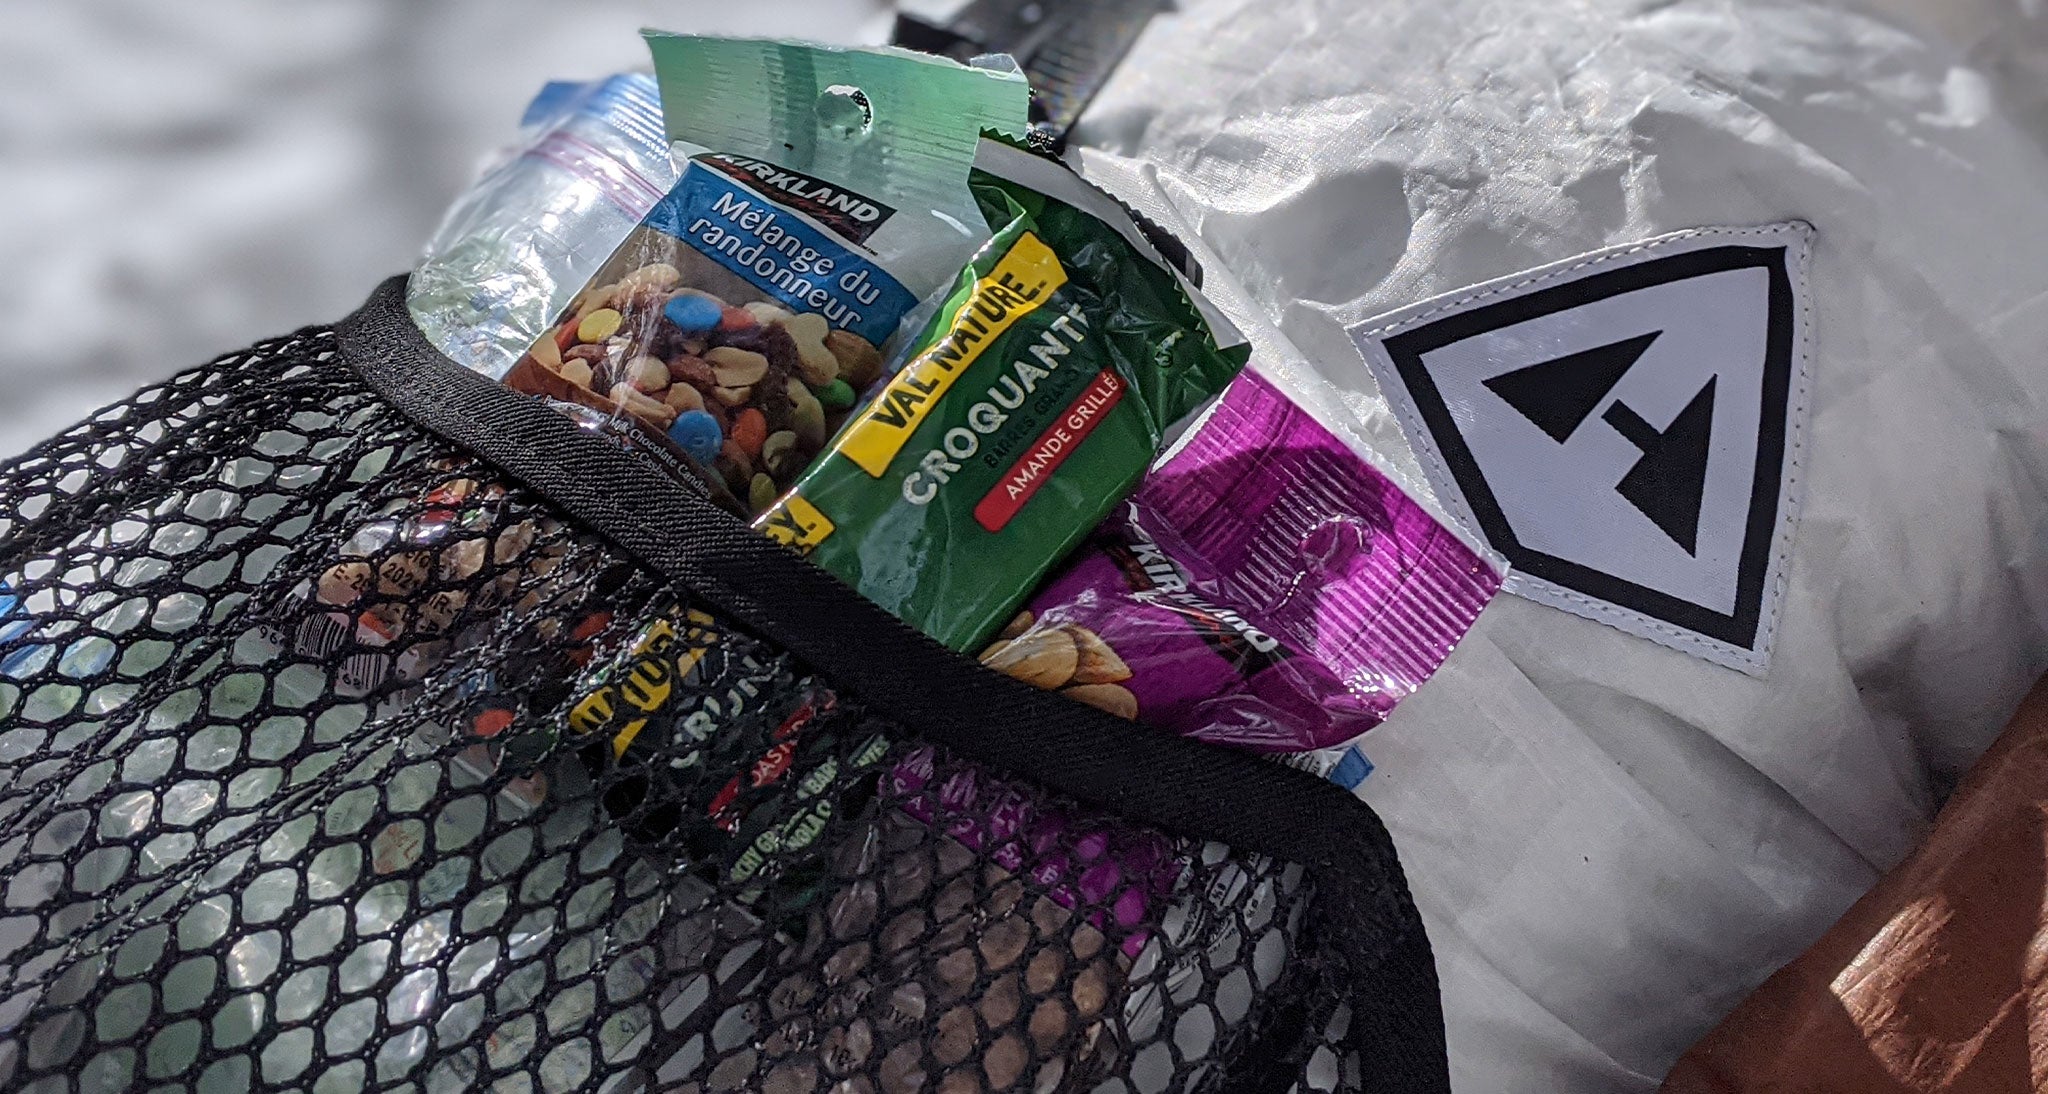 Keep Your Feet on the Gas: How to Resupply (And Eat) Like a Champ on a Thru Hike, Part 2